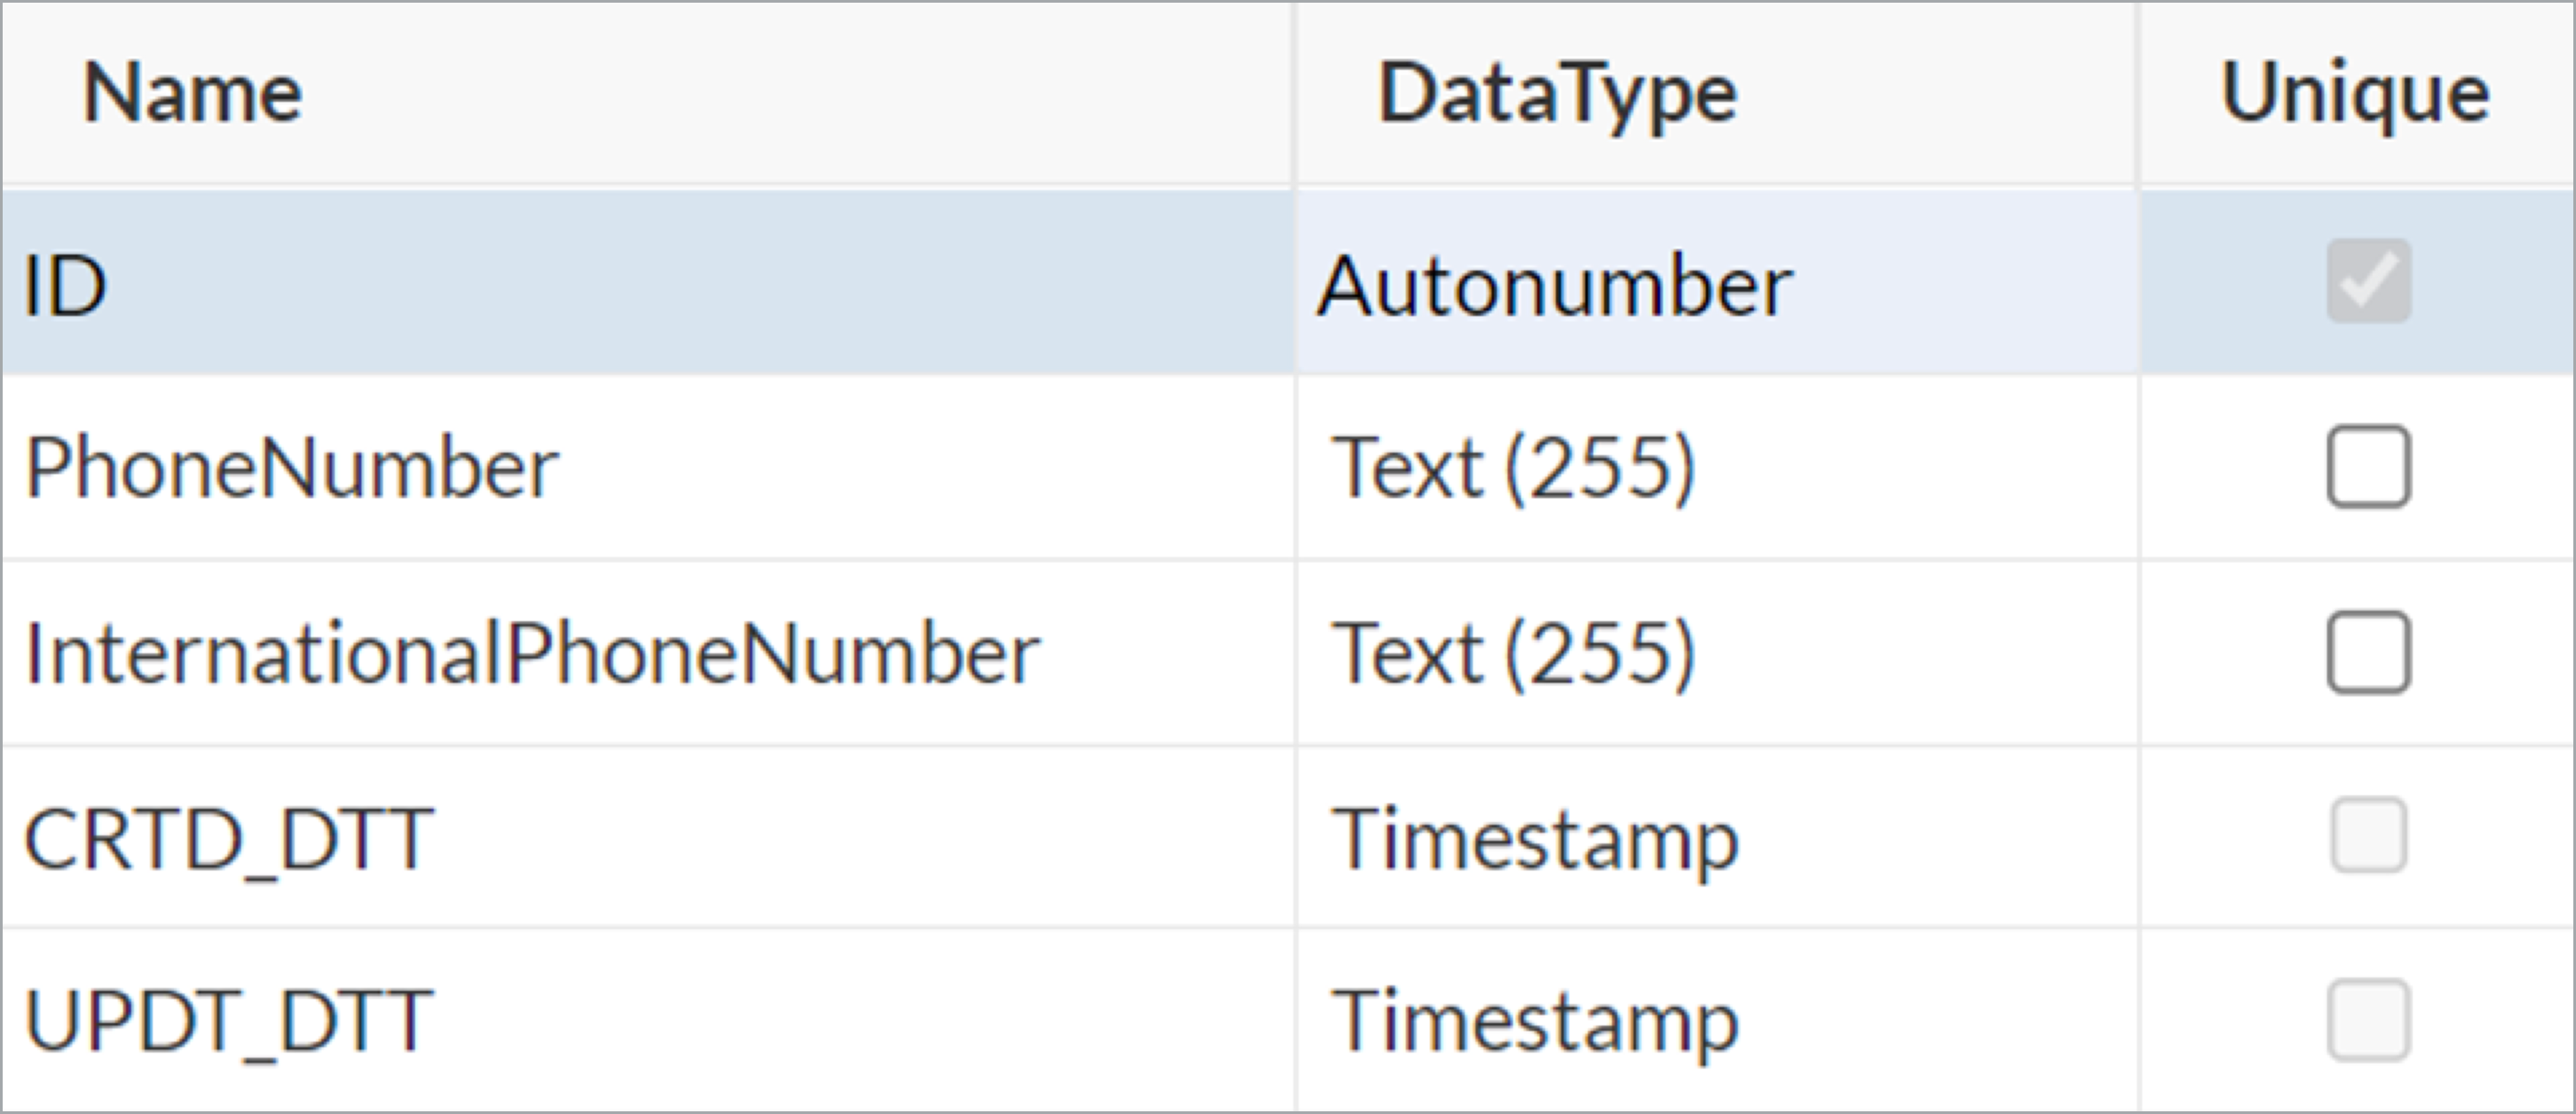 Sample table design showing the fields for phone number input and the related international phone number.